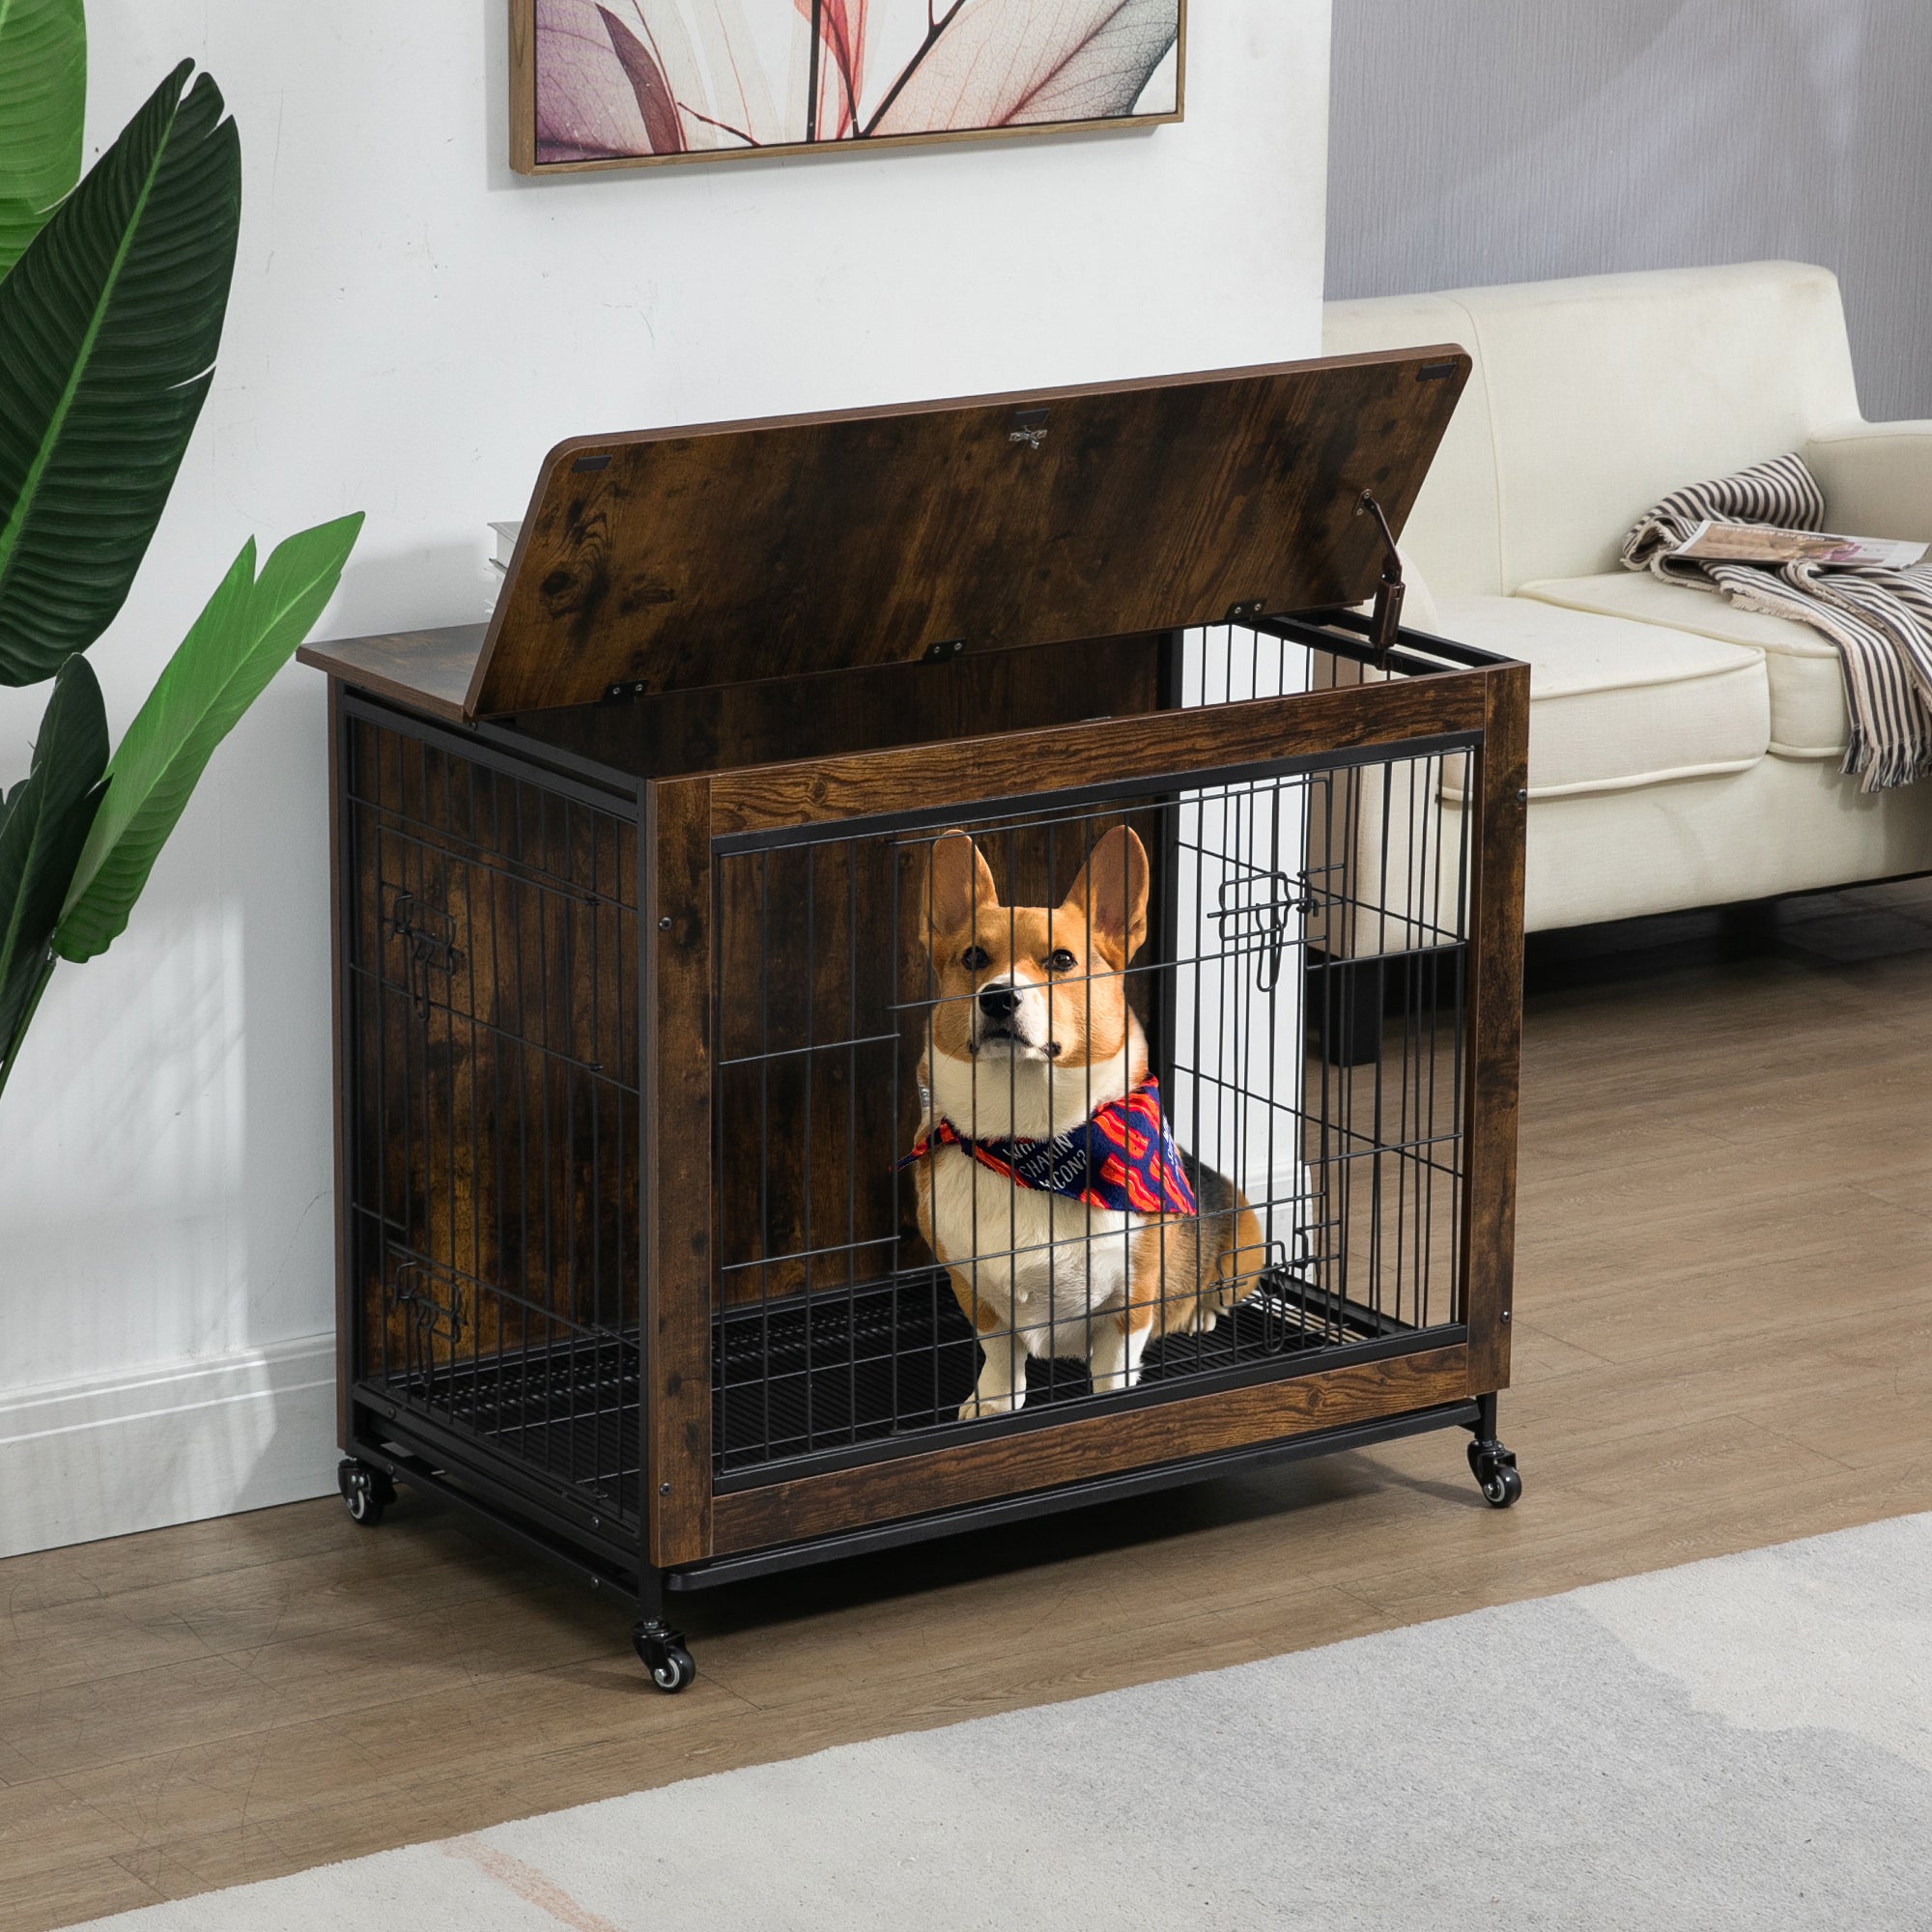 🆓🚛 23.6"L X 20"W X 26"H Dog Crate Furniture With Cushion, Wooden Dog Crate Table, Double-Doors Dog Furniture, Dog Kennel Indoor for Small Dog, Dog House, Dog Cage Small, Rustic Brown